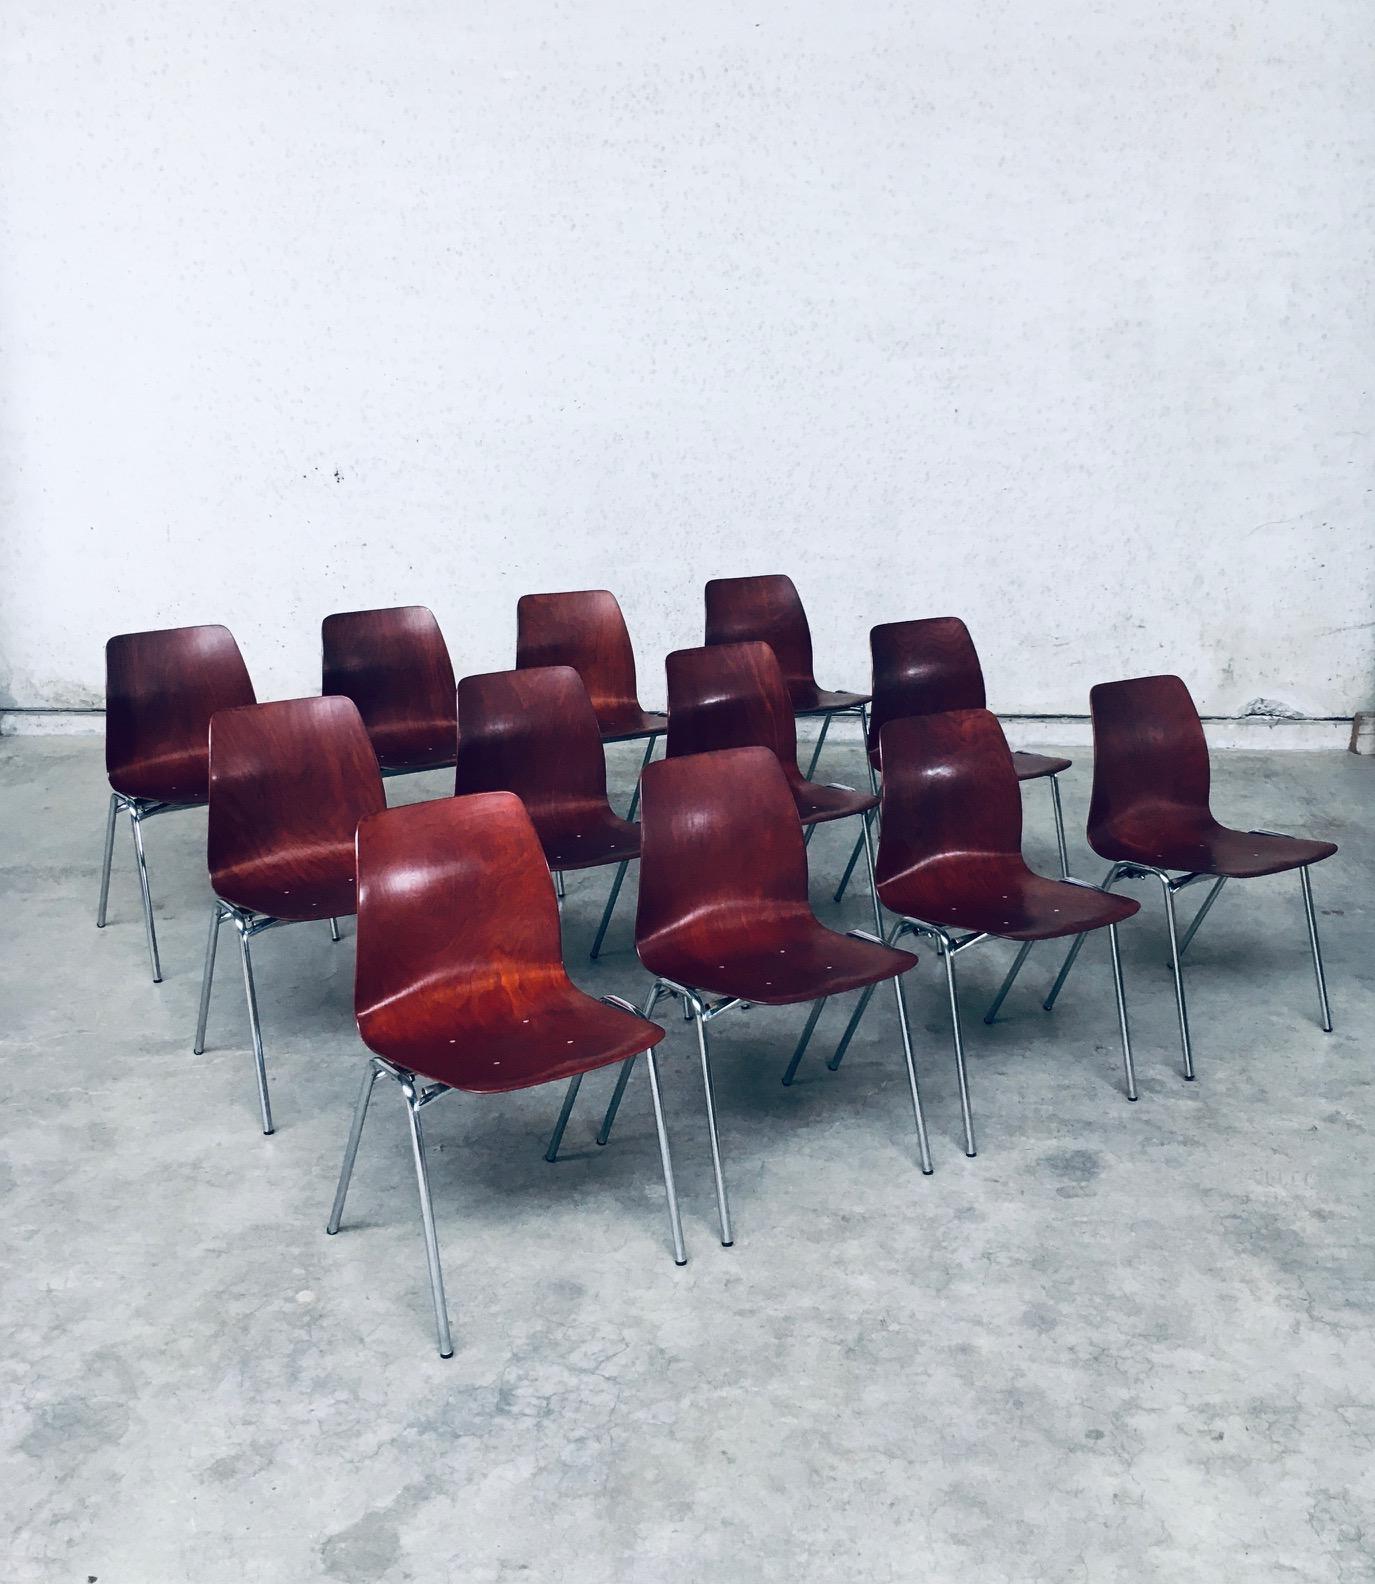 Vintage Midcentury Modern German Design Stacking Chairs by Elmar Flötotto for Pagholz. Made in Germany, 1960's / 70's period. Set of 12 chairs which can be stacked in one stack.  Pagwood / Molded Plywood on chromed steel frame. They all have new